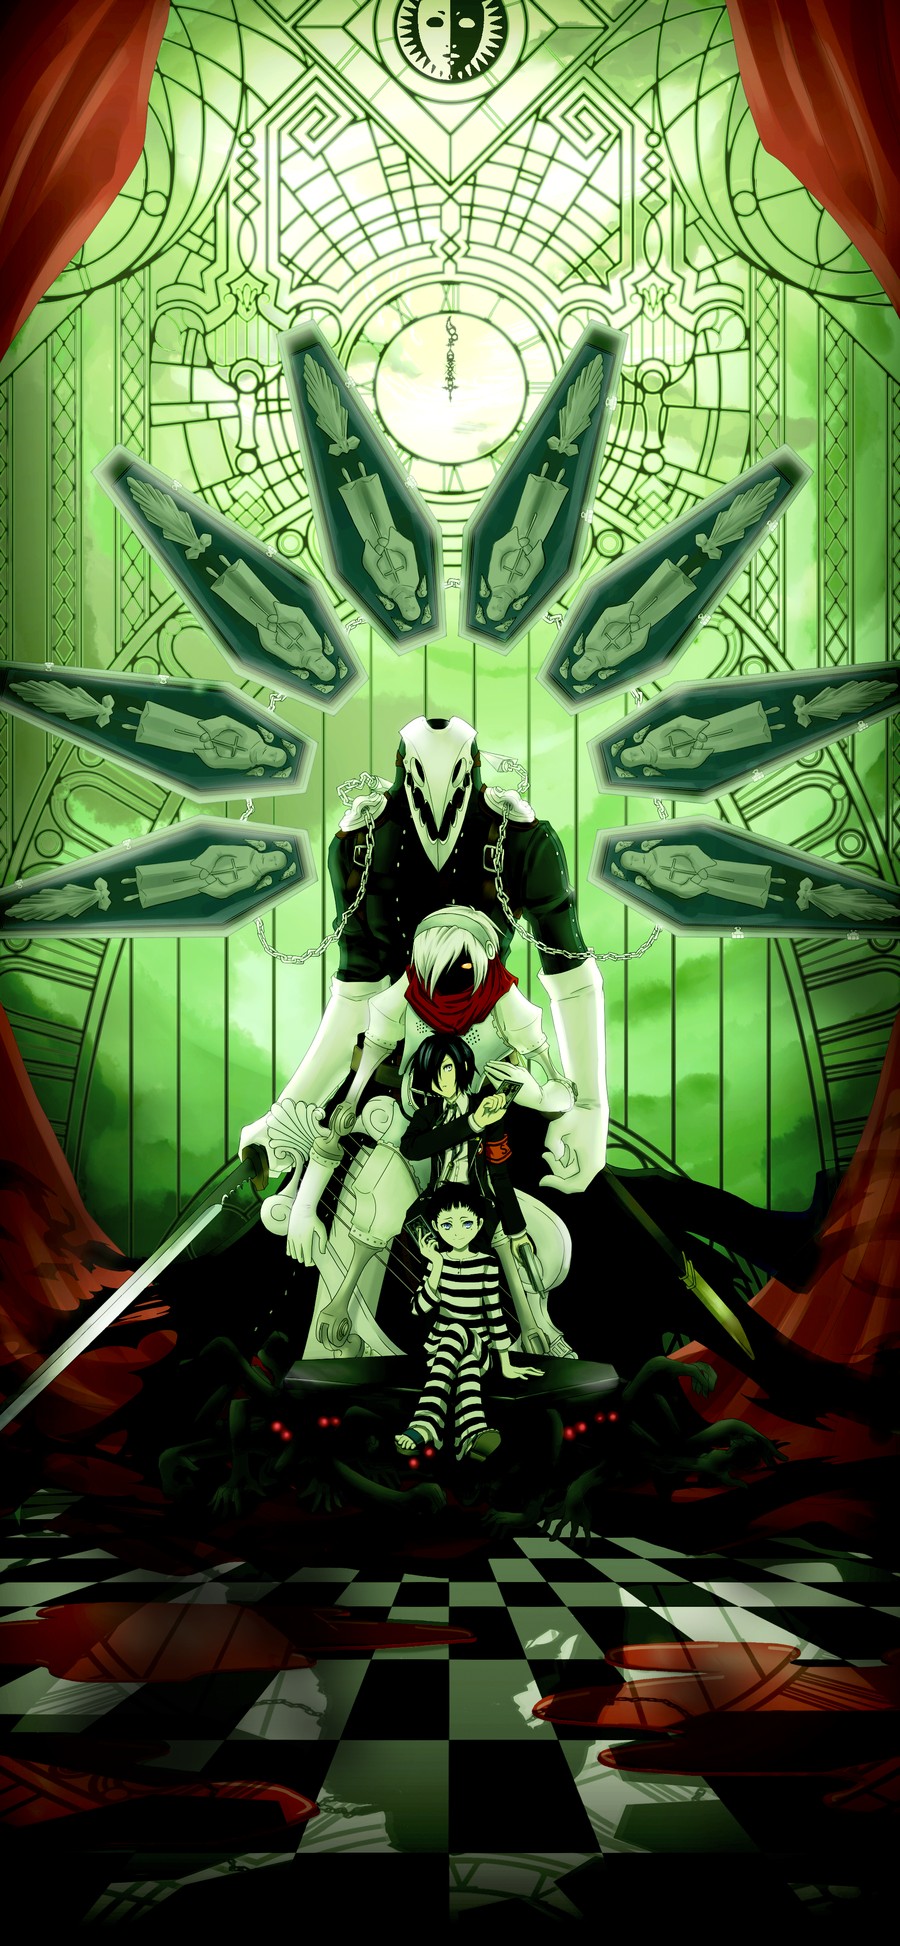 Orpheus Persona 3 Wallpapers